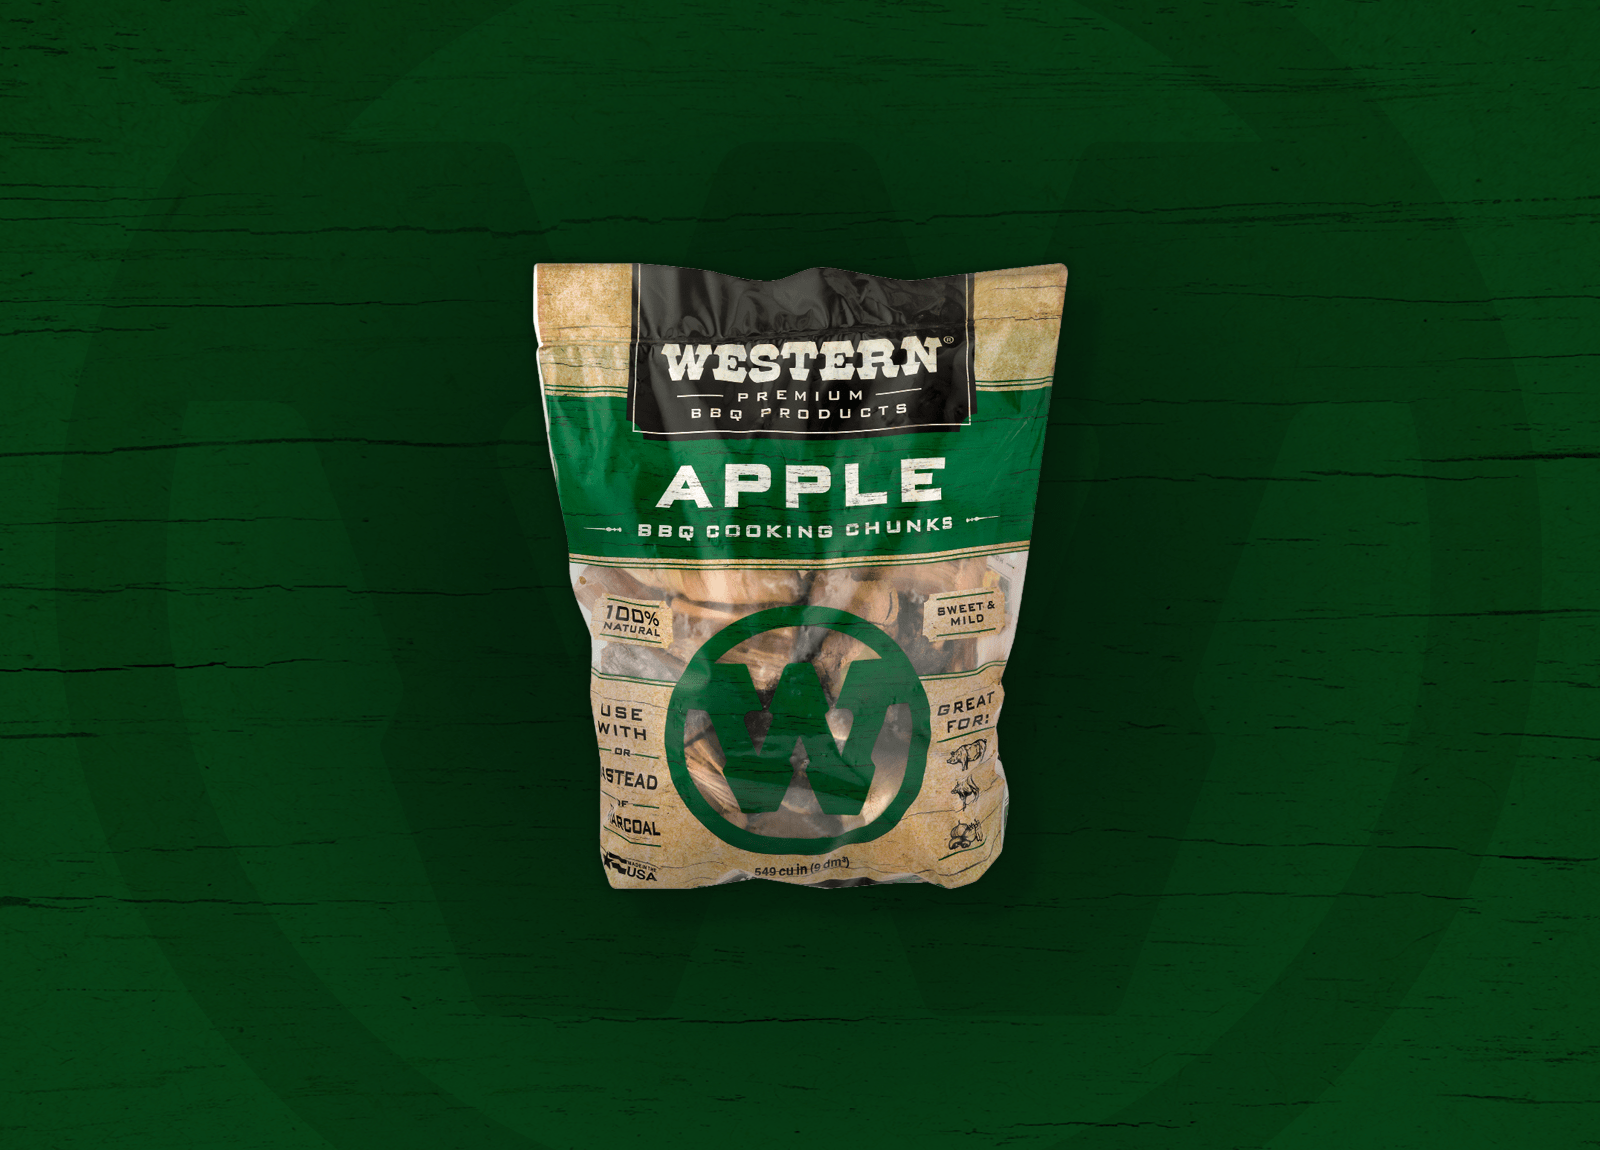 Western Apple BBQ Cooking Chunks